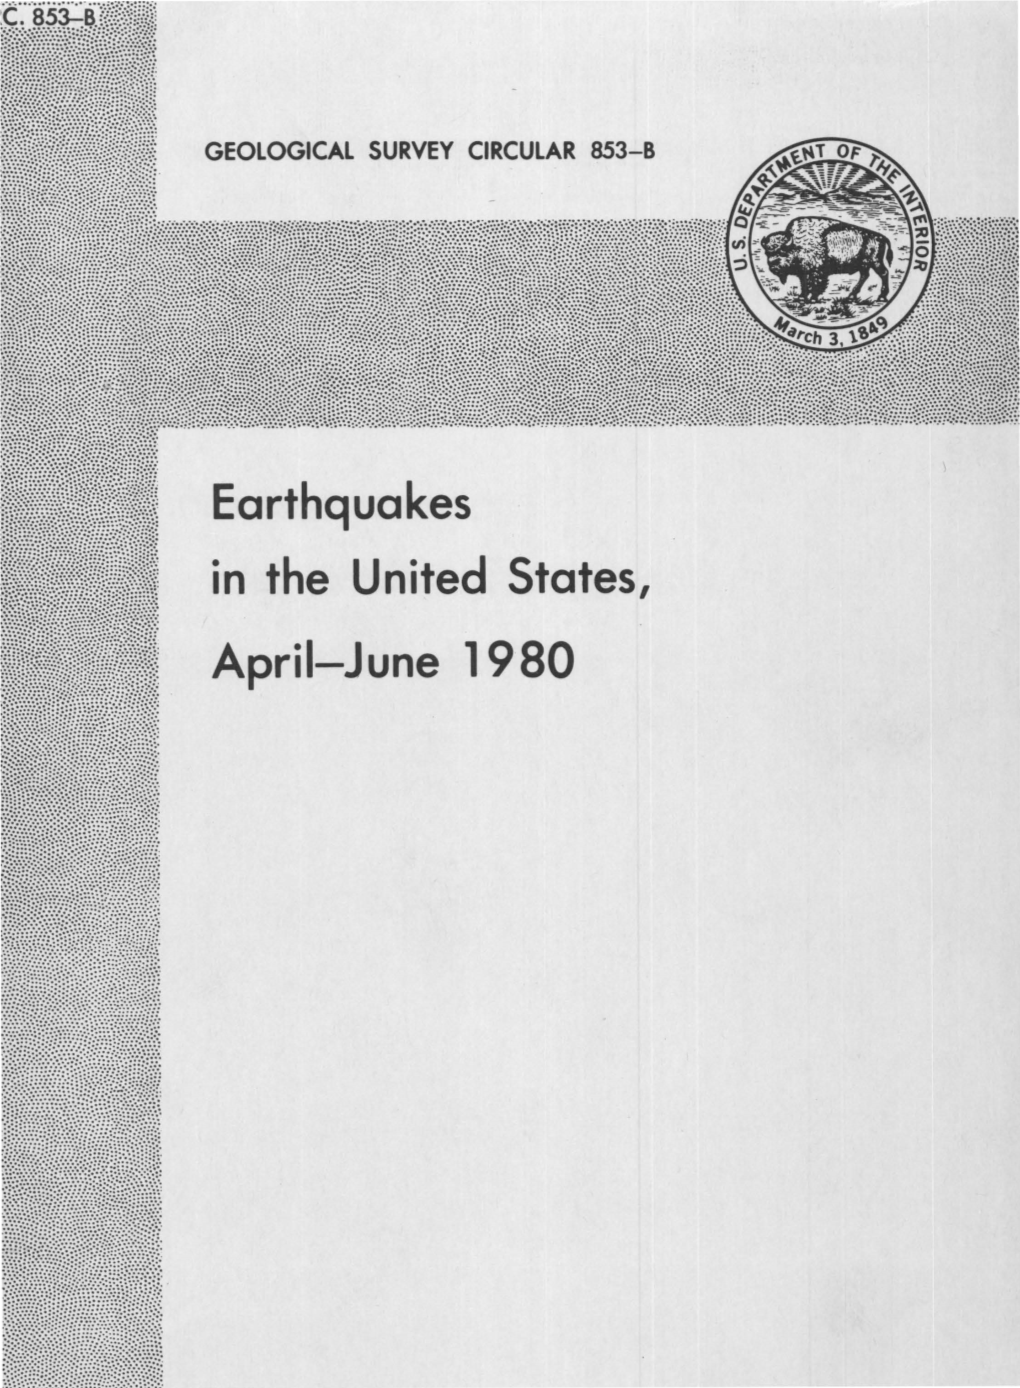 Earthquakes in the United States, April-June 1980 '